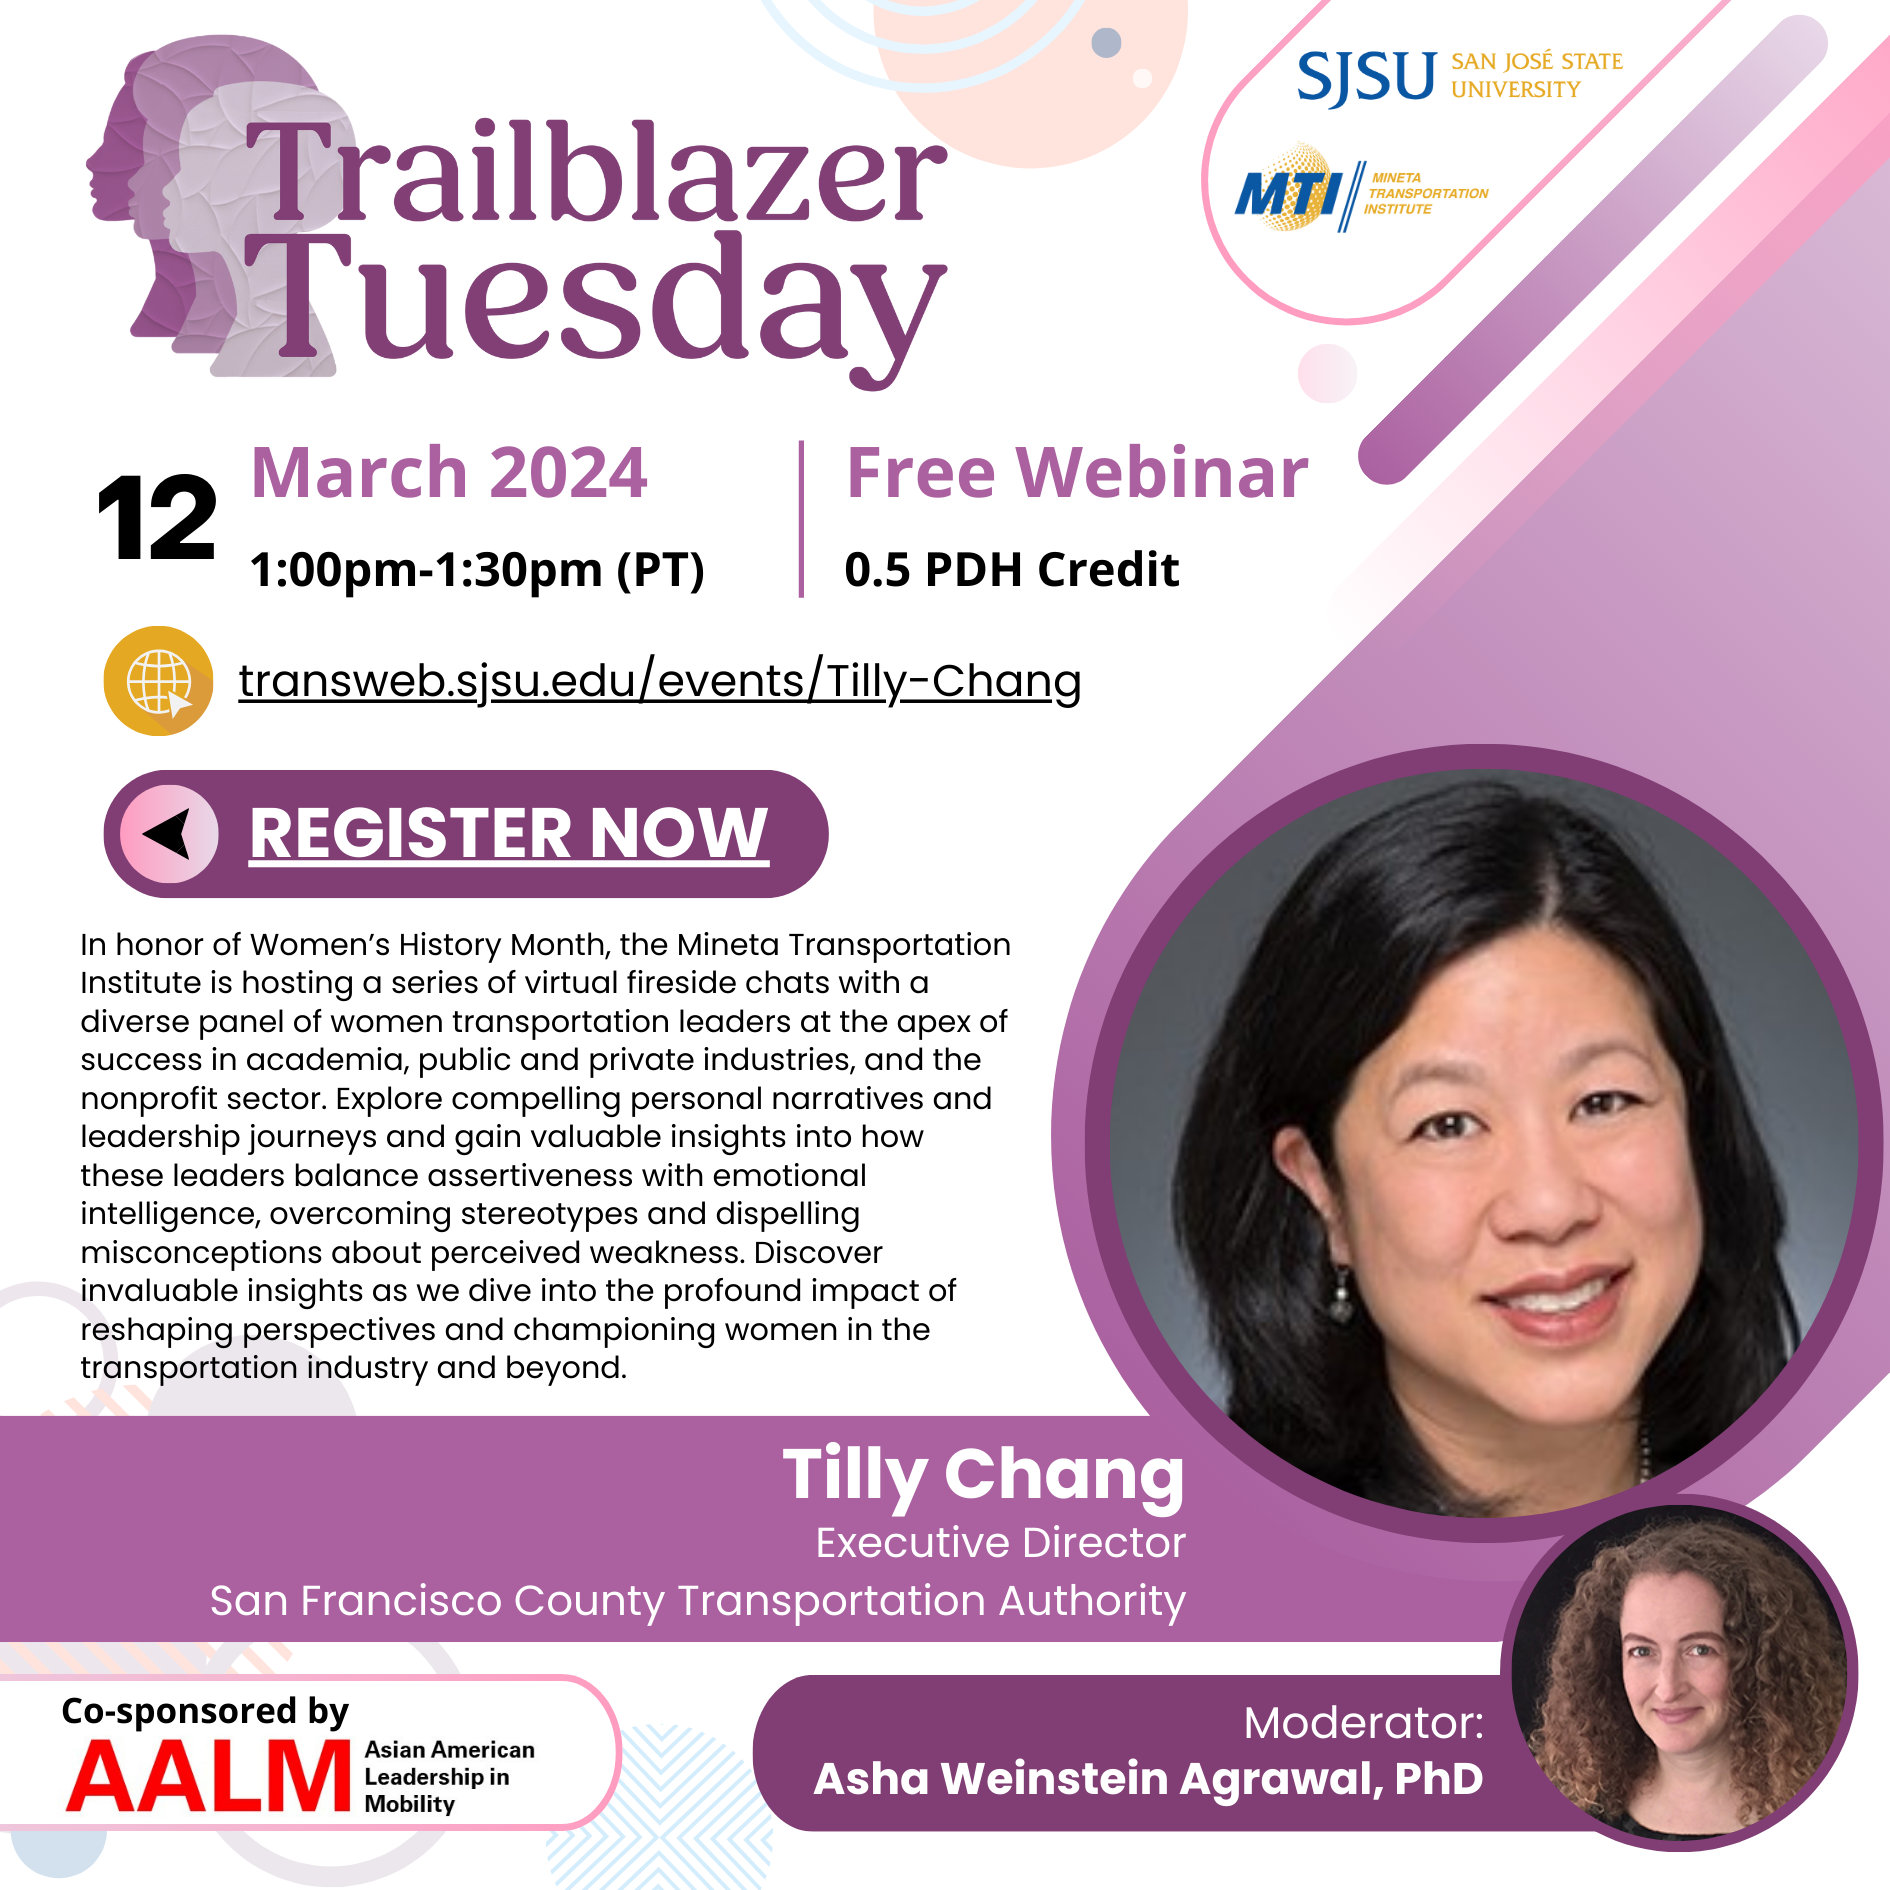 Trailblazer Tuesday with Tilly Chang